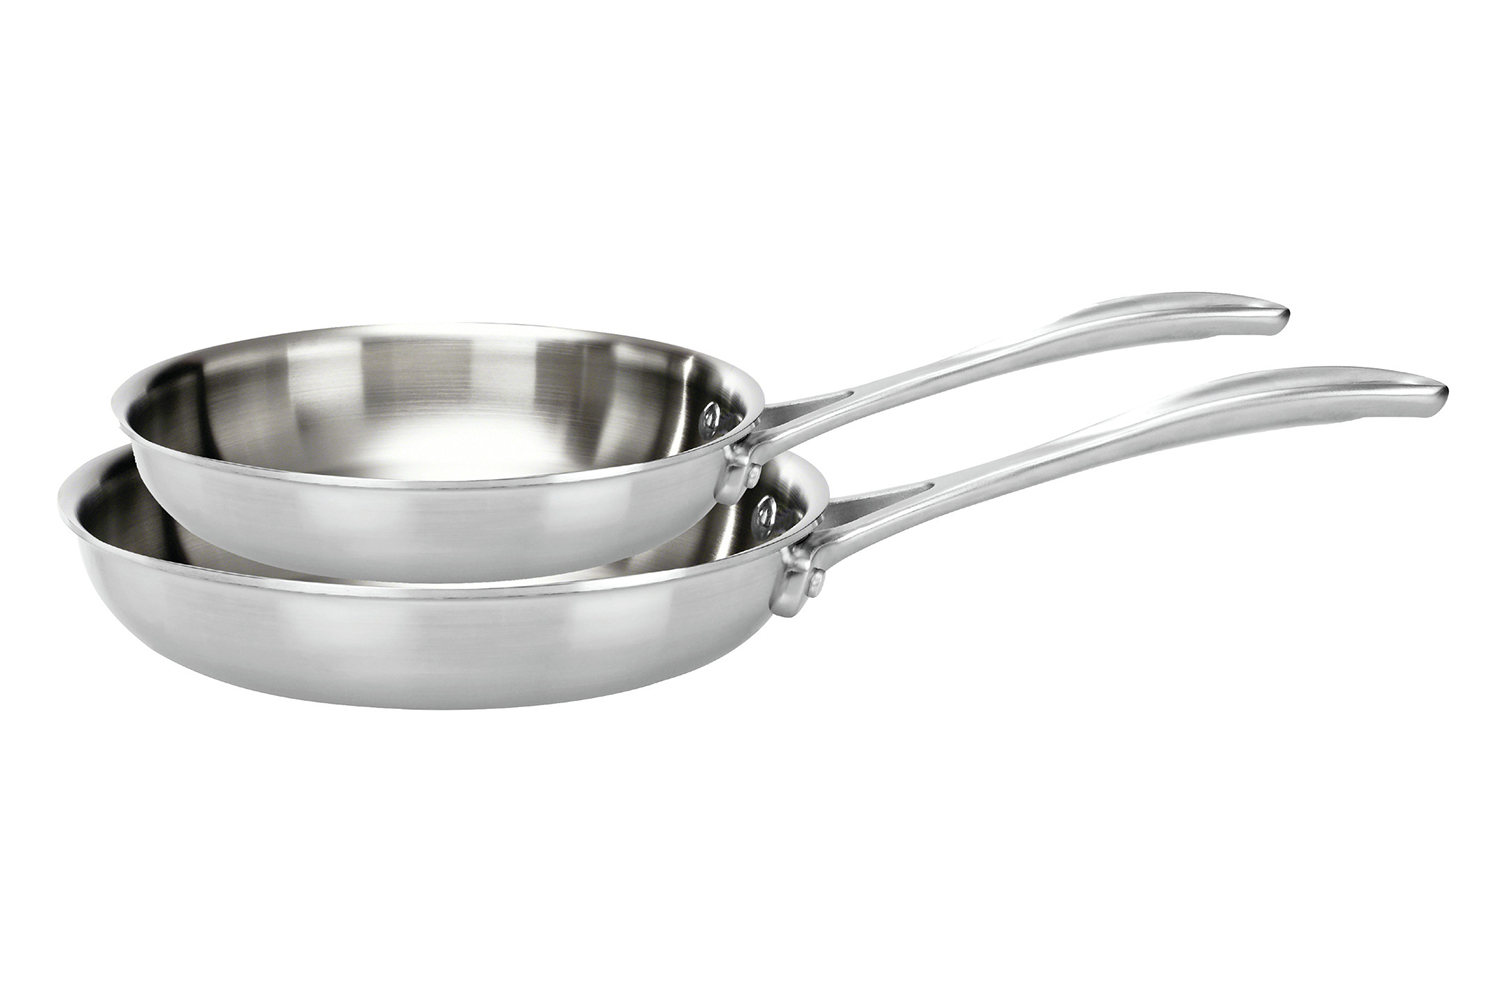 Zwilling Clad CFX Stainless Steel Ceramic Nonstick 9.5 Fry Pan with Lid